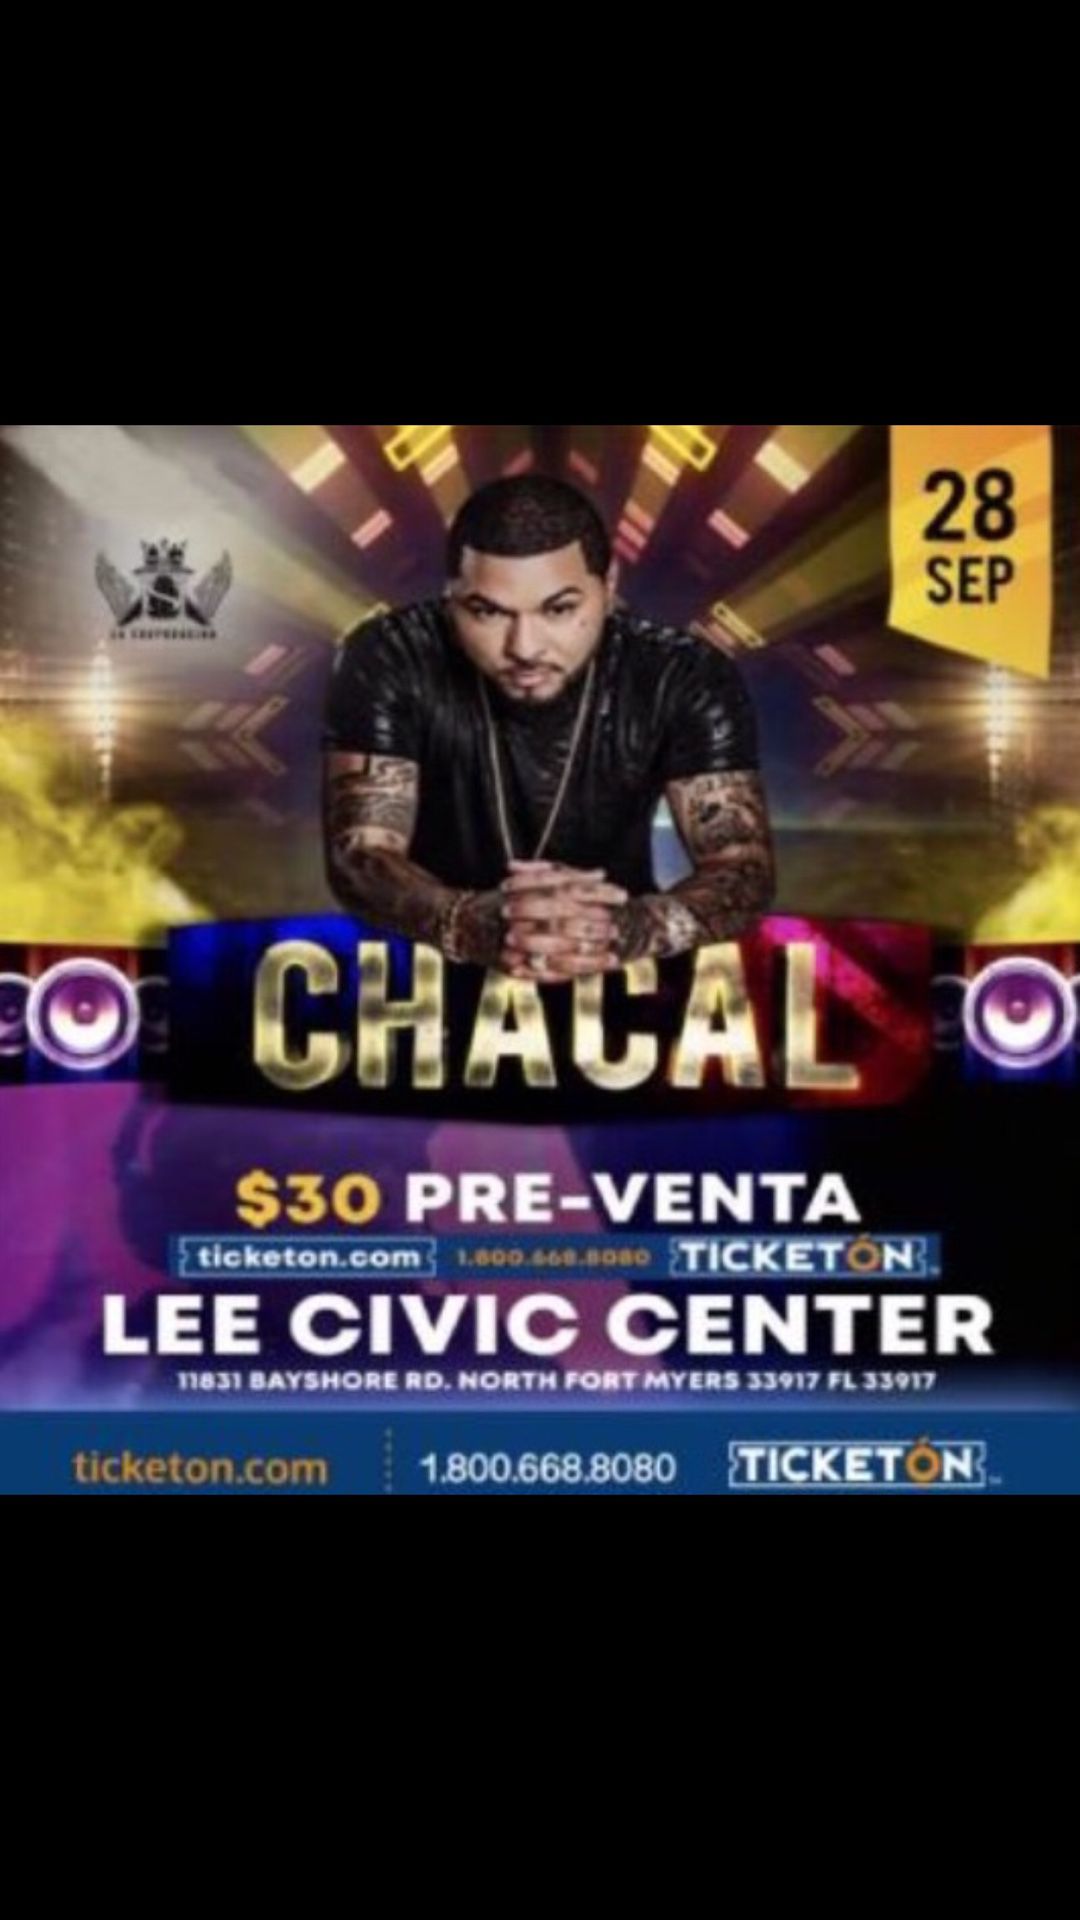 CONCERT CHACAL TICKETS SEPT 28